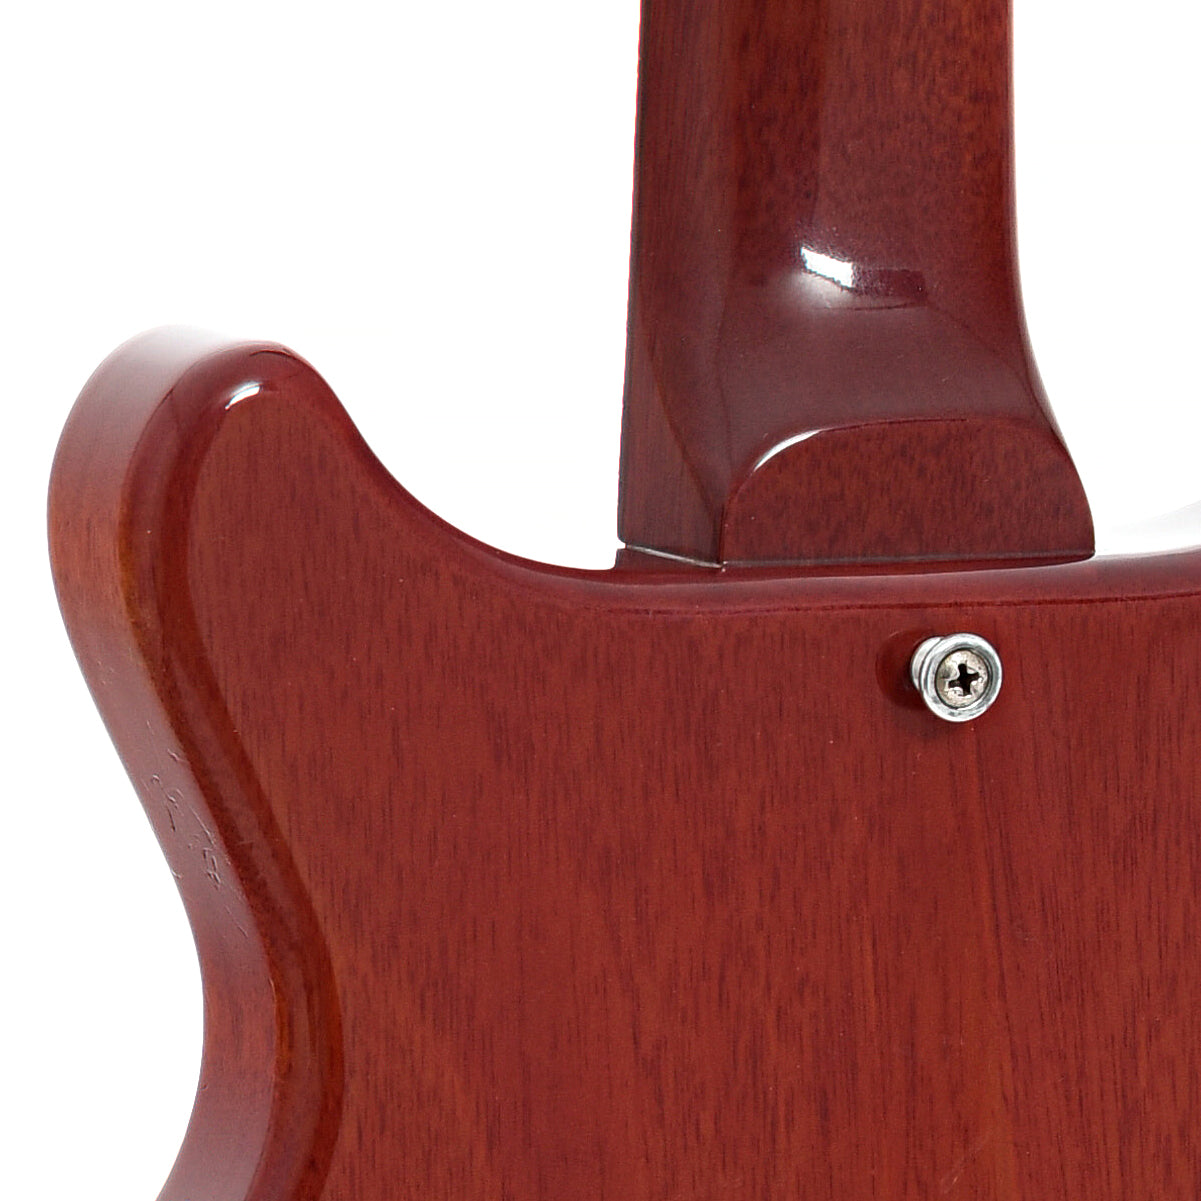 Neck joint of Gibson Les Paul Jr Electric Guitar (1960)